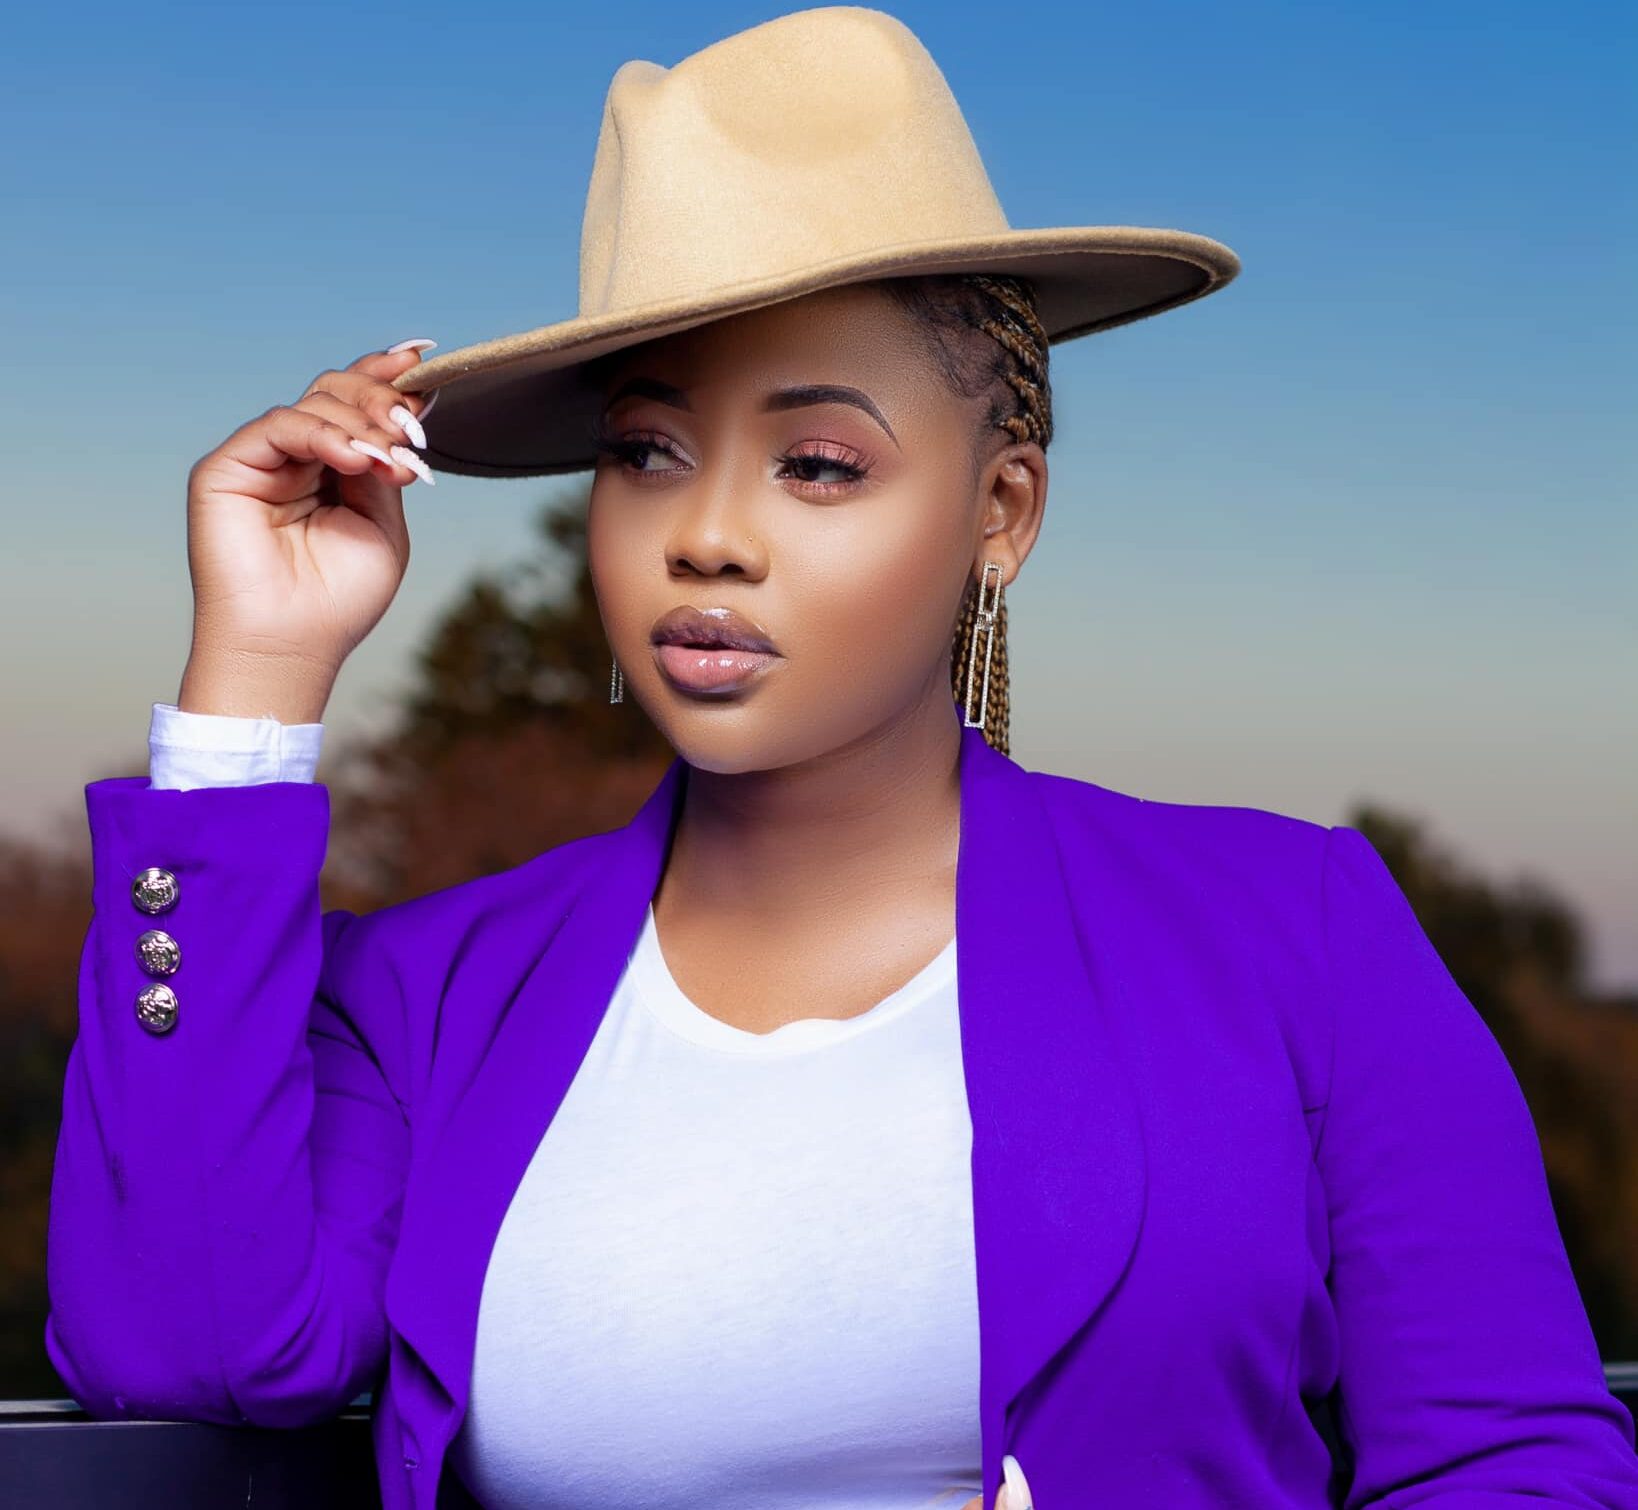 Cleo Ice Queen nominated for the 2021 All Africa Music Awards (Afrima)